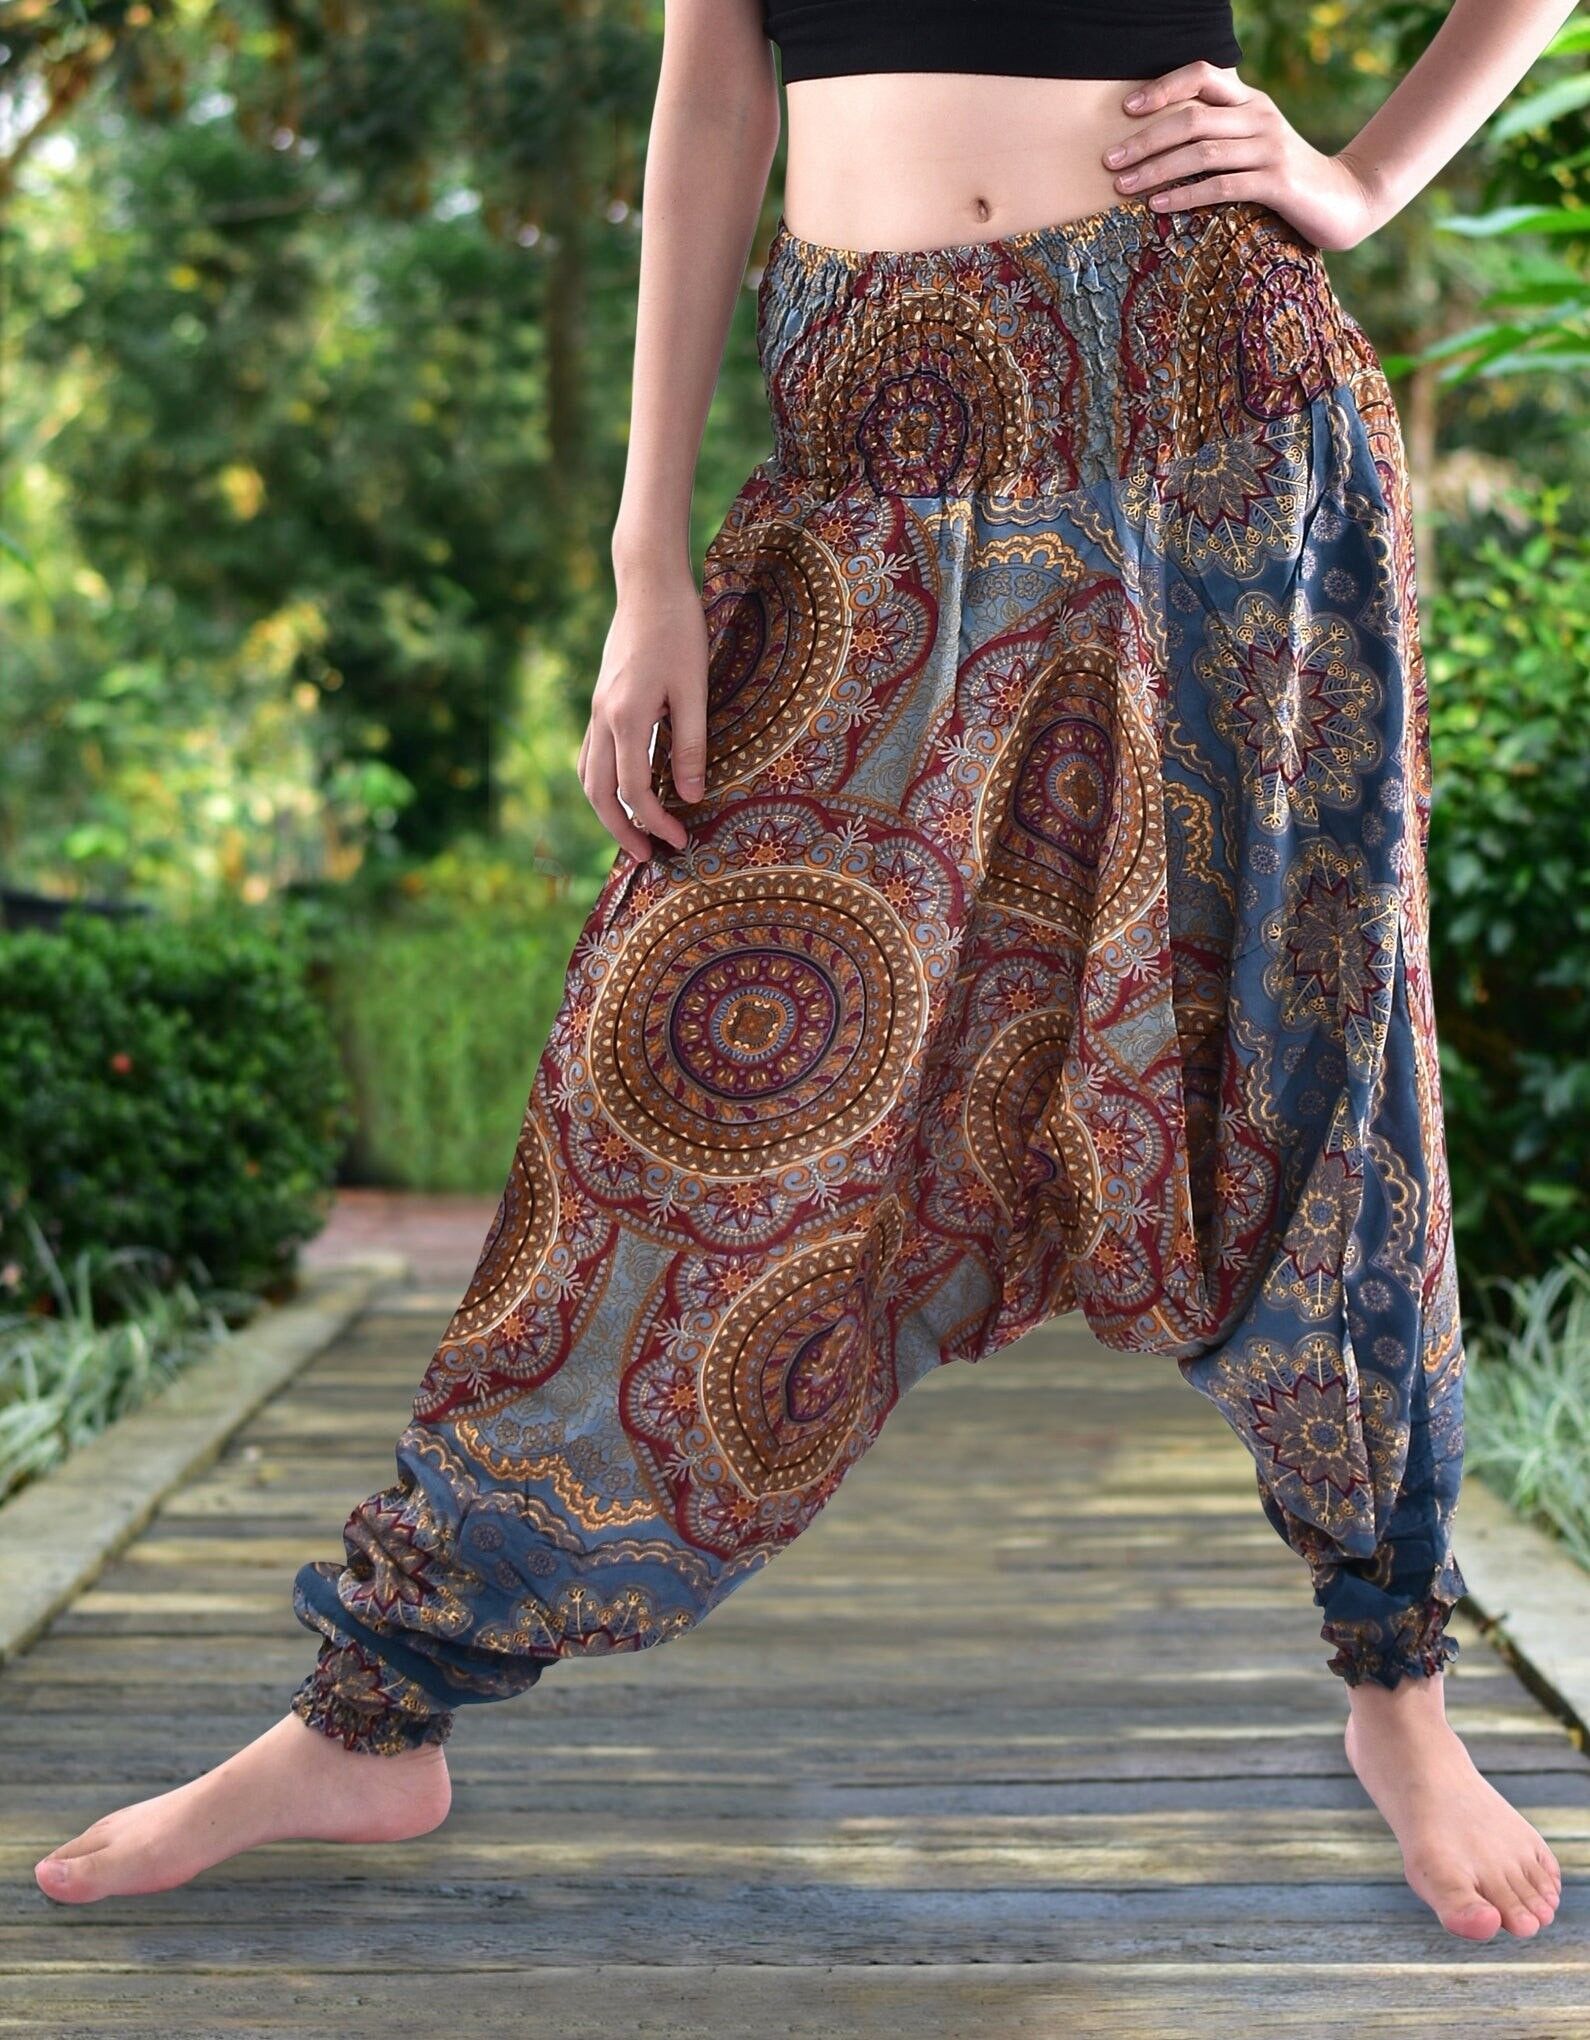 Bohotusk Womens Plain Harem Pants 4 Sizes Available S/M, LXL, 2XL/3XL, 4XL  Hand Made in Thailand Stock in UK - Etsy UK